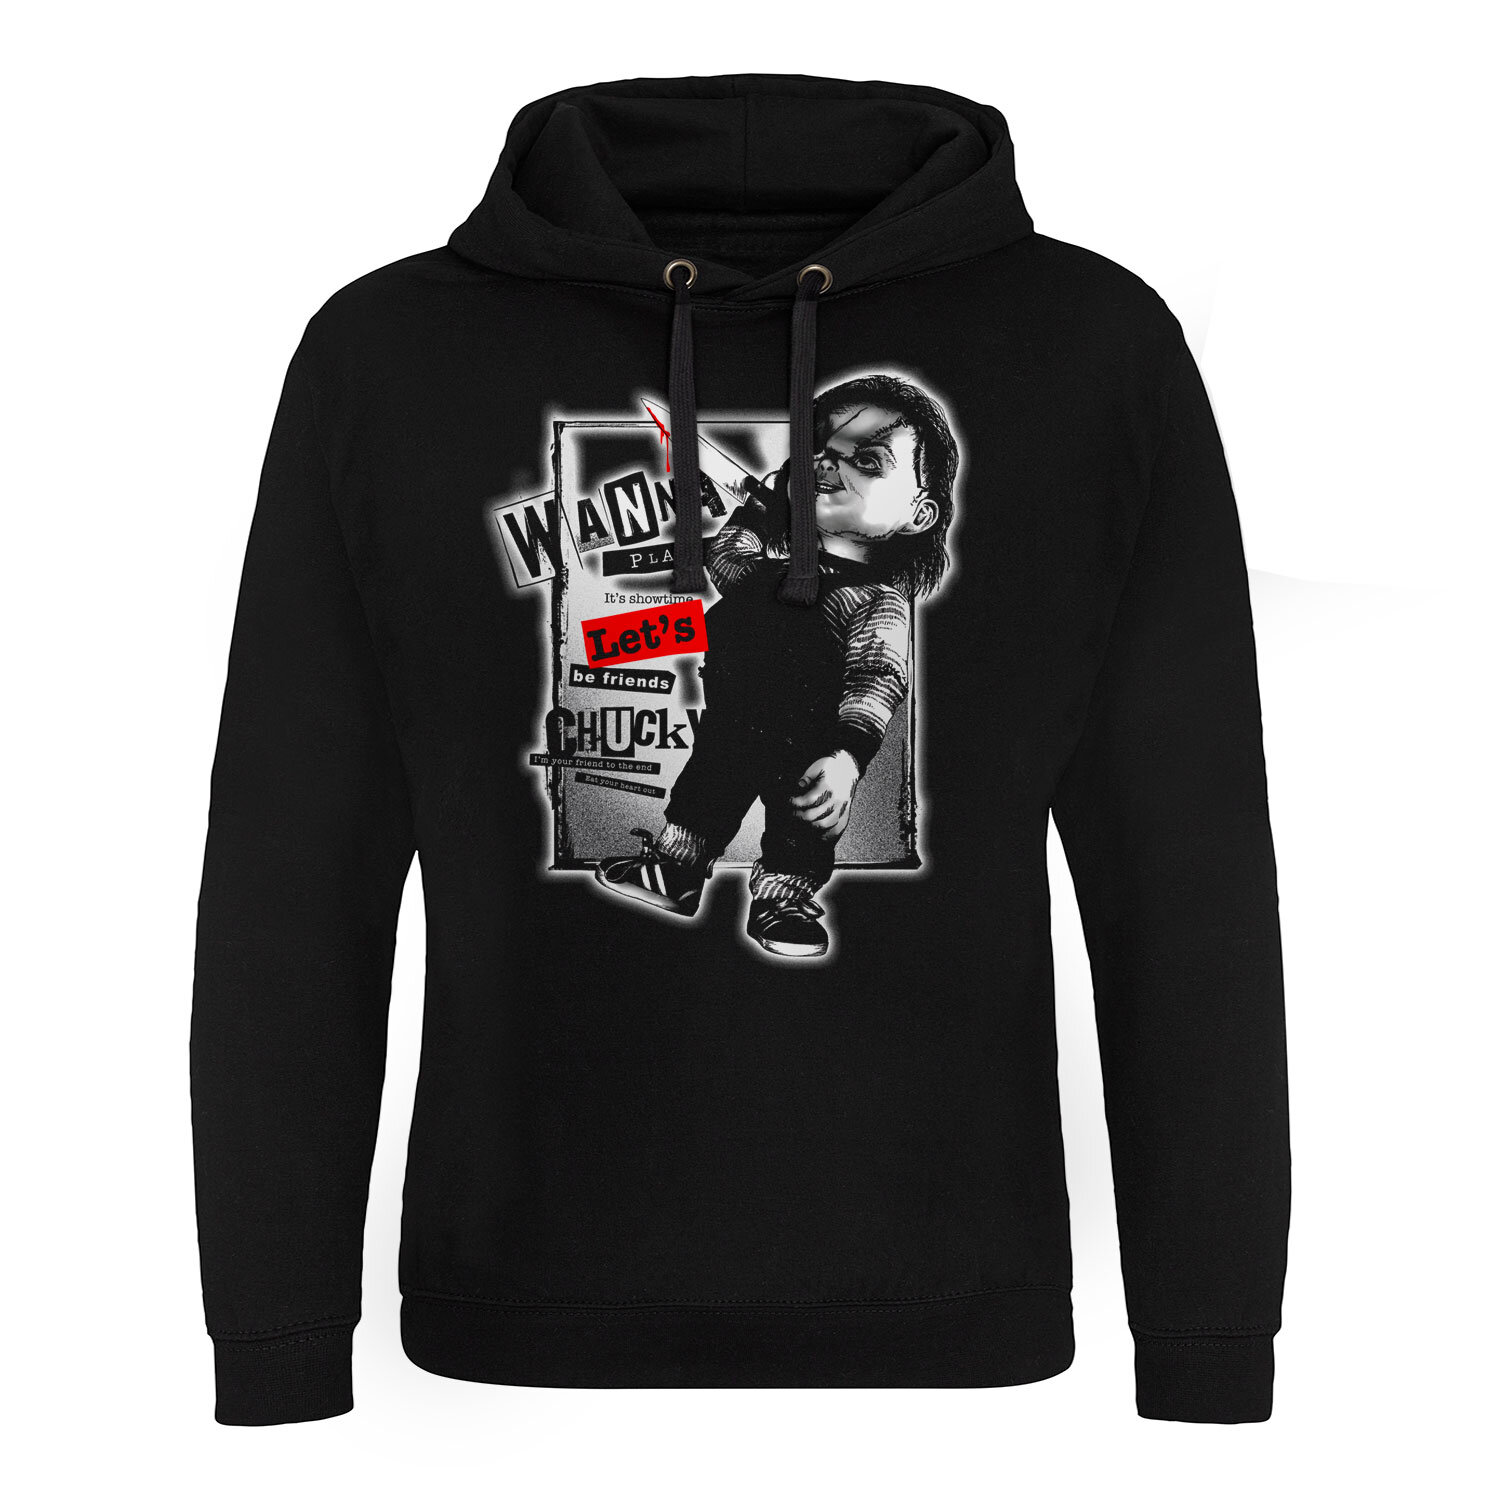 Chucky - Let's Be Friends Epic Hoodie